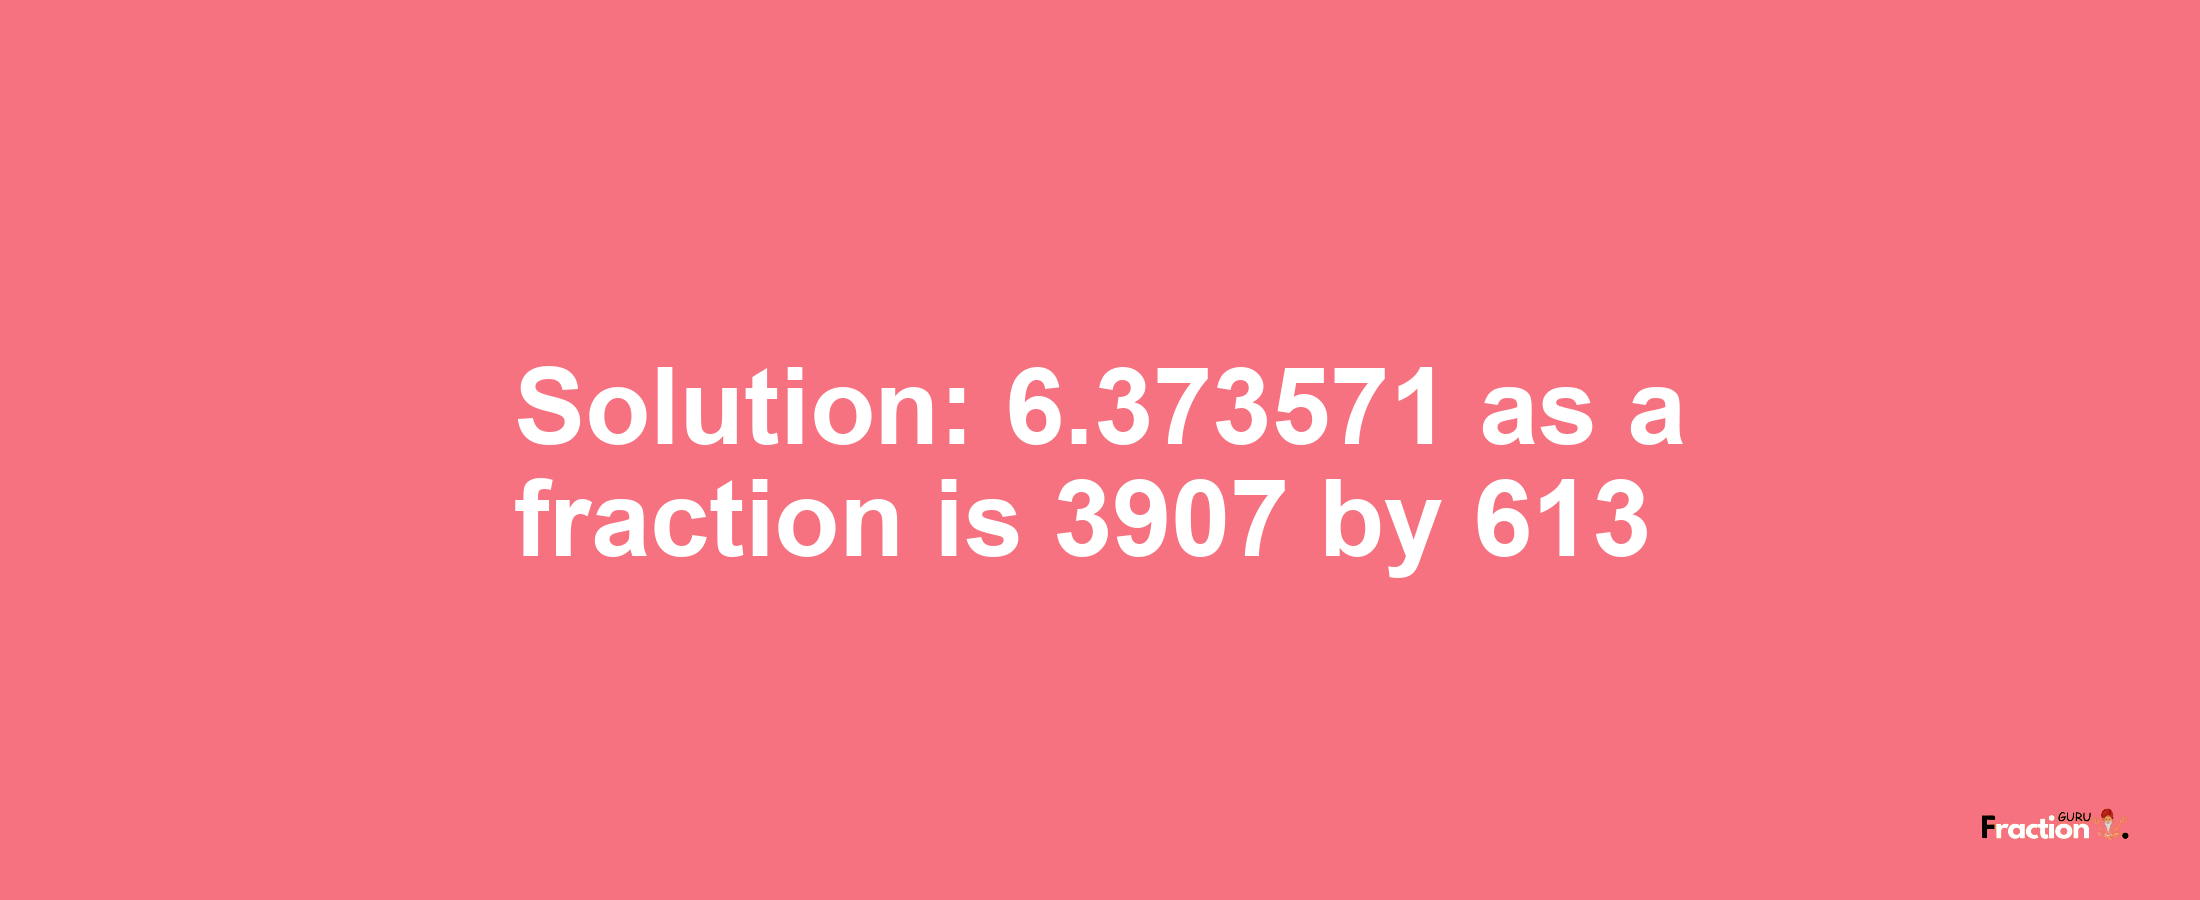 Solution:6.373571 as a fraction is 3907/613